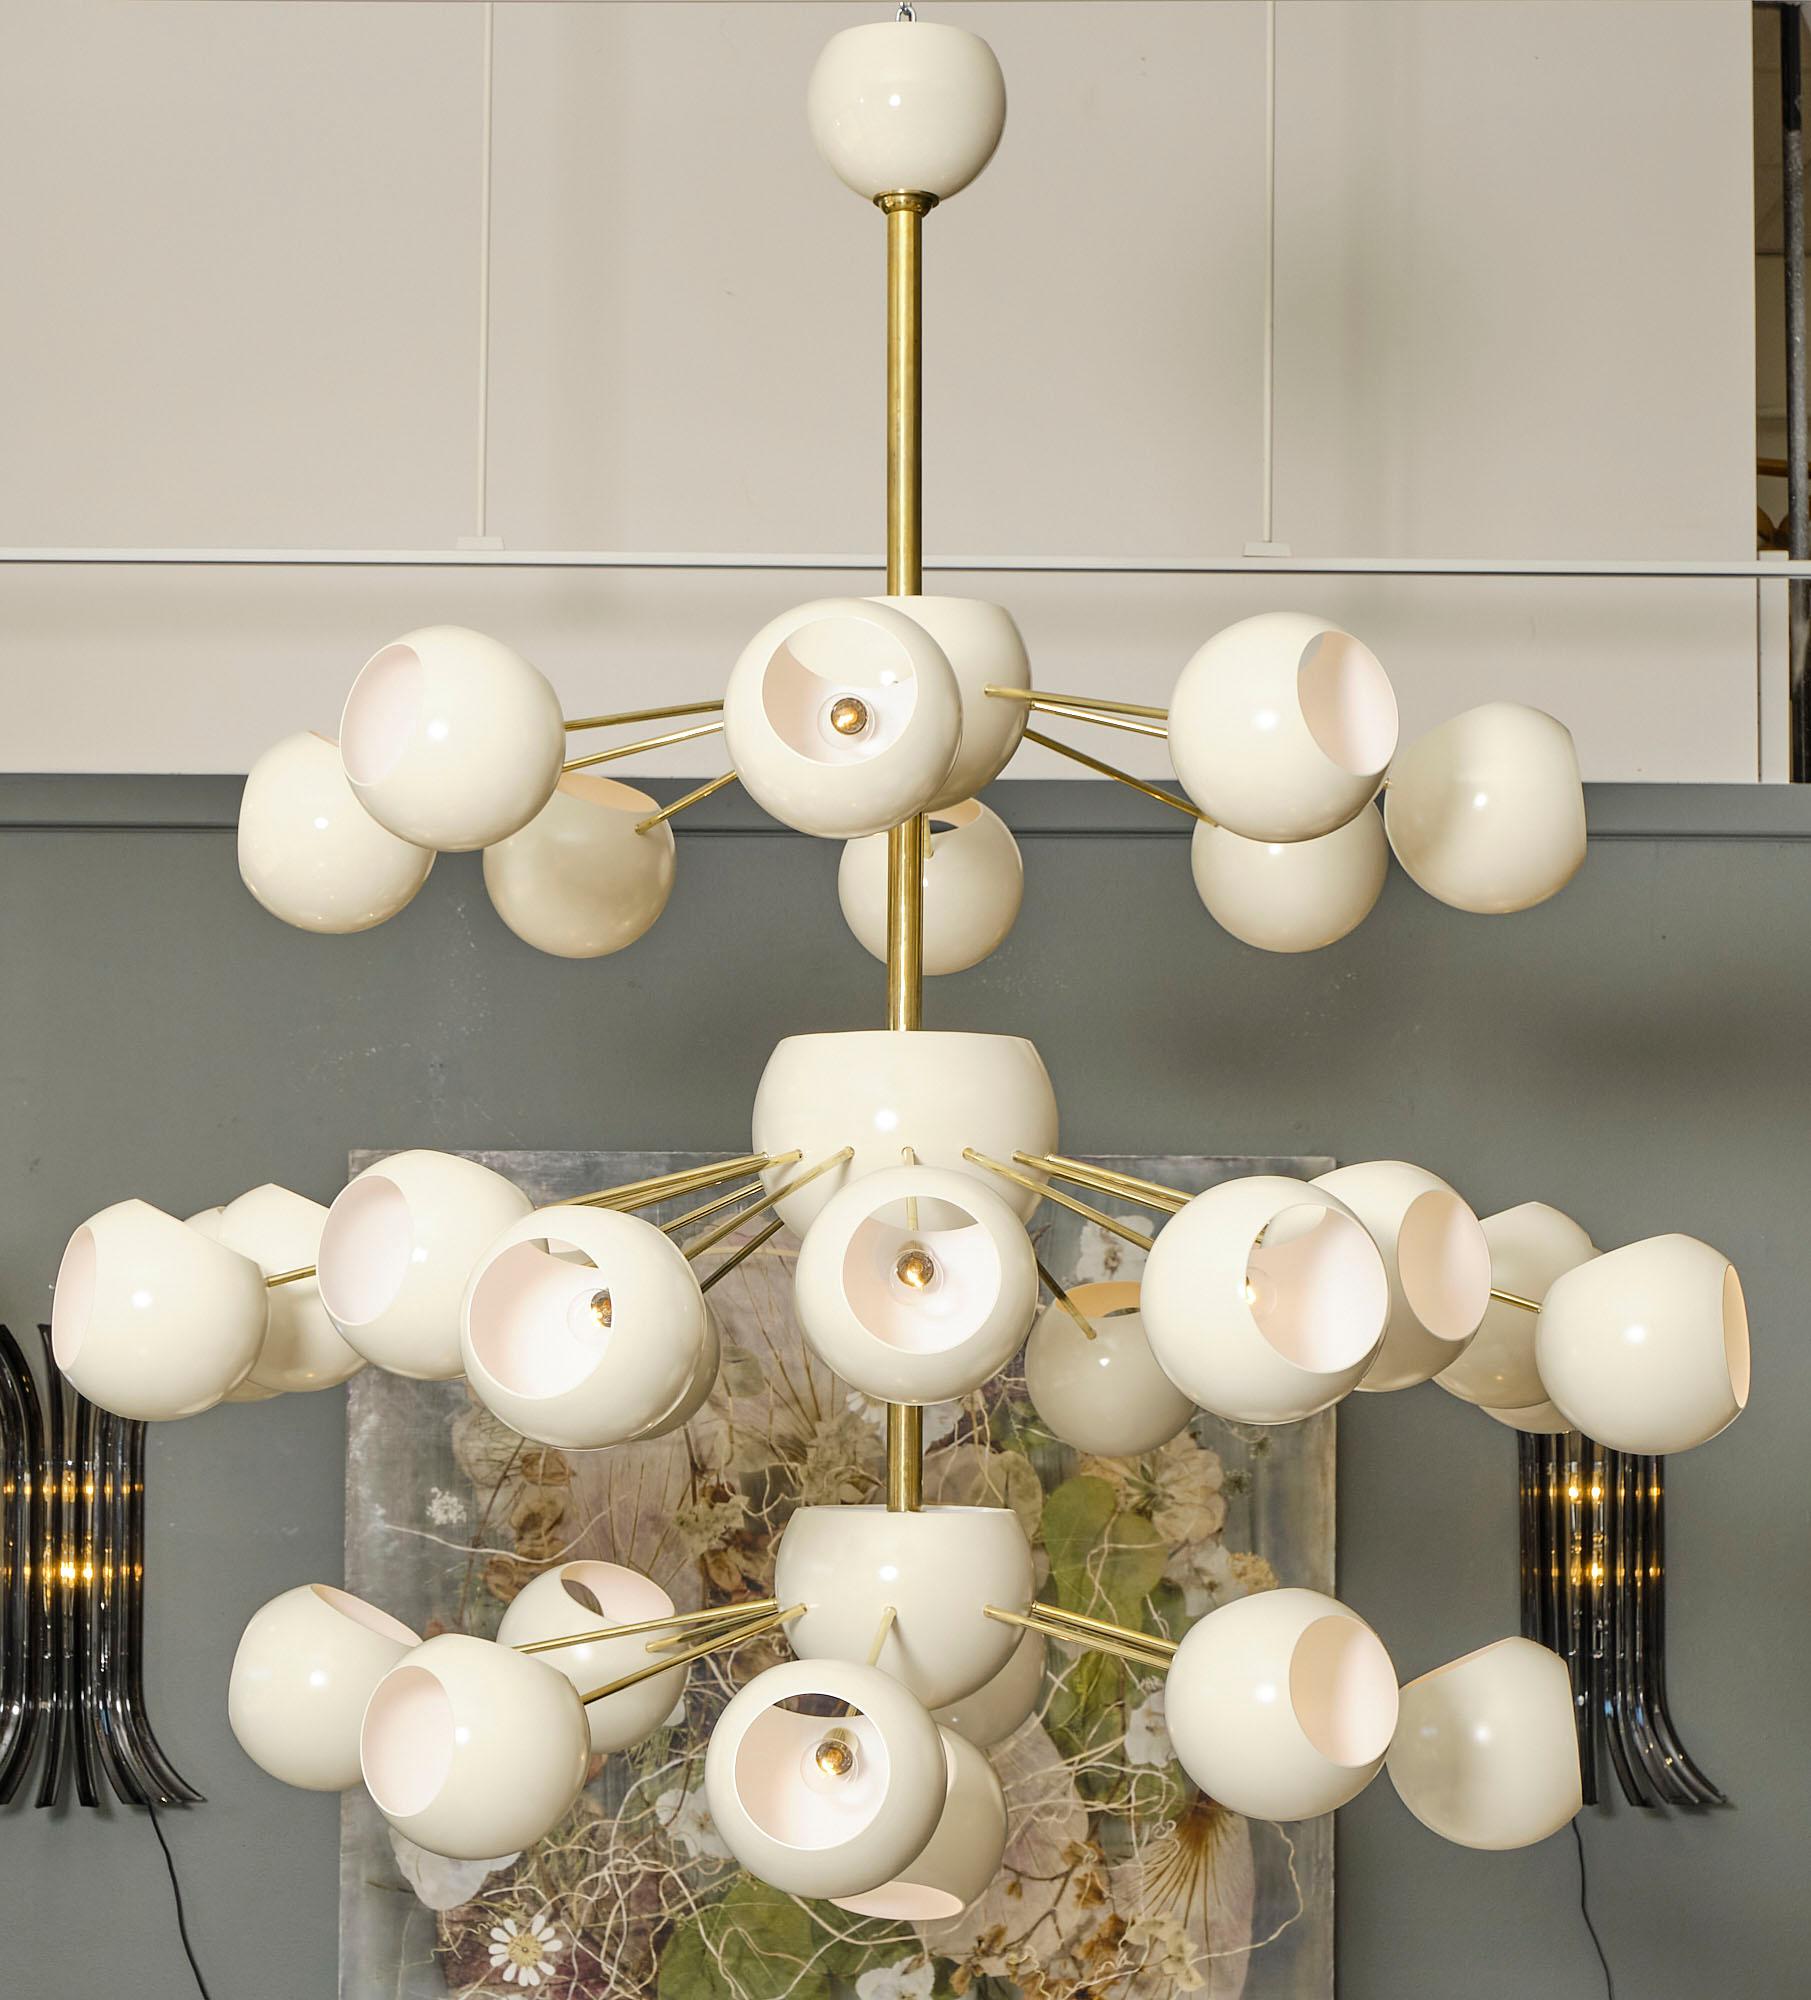 Chandelier, Italian, from the Veneto region with multiple ivory steel lacquered orbs connected with brass stems to the main body of the piece. This chandelier has been newly wired to fit US standards.